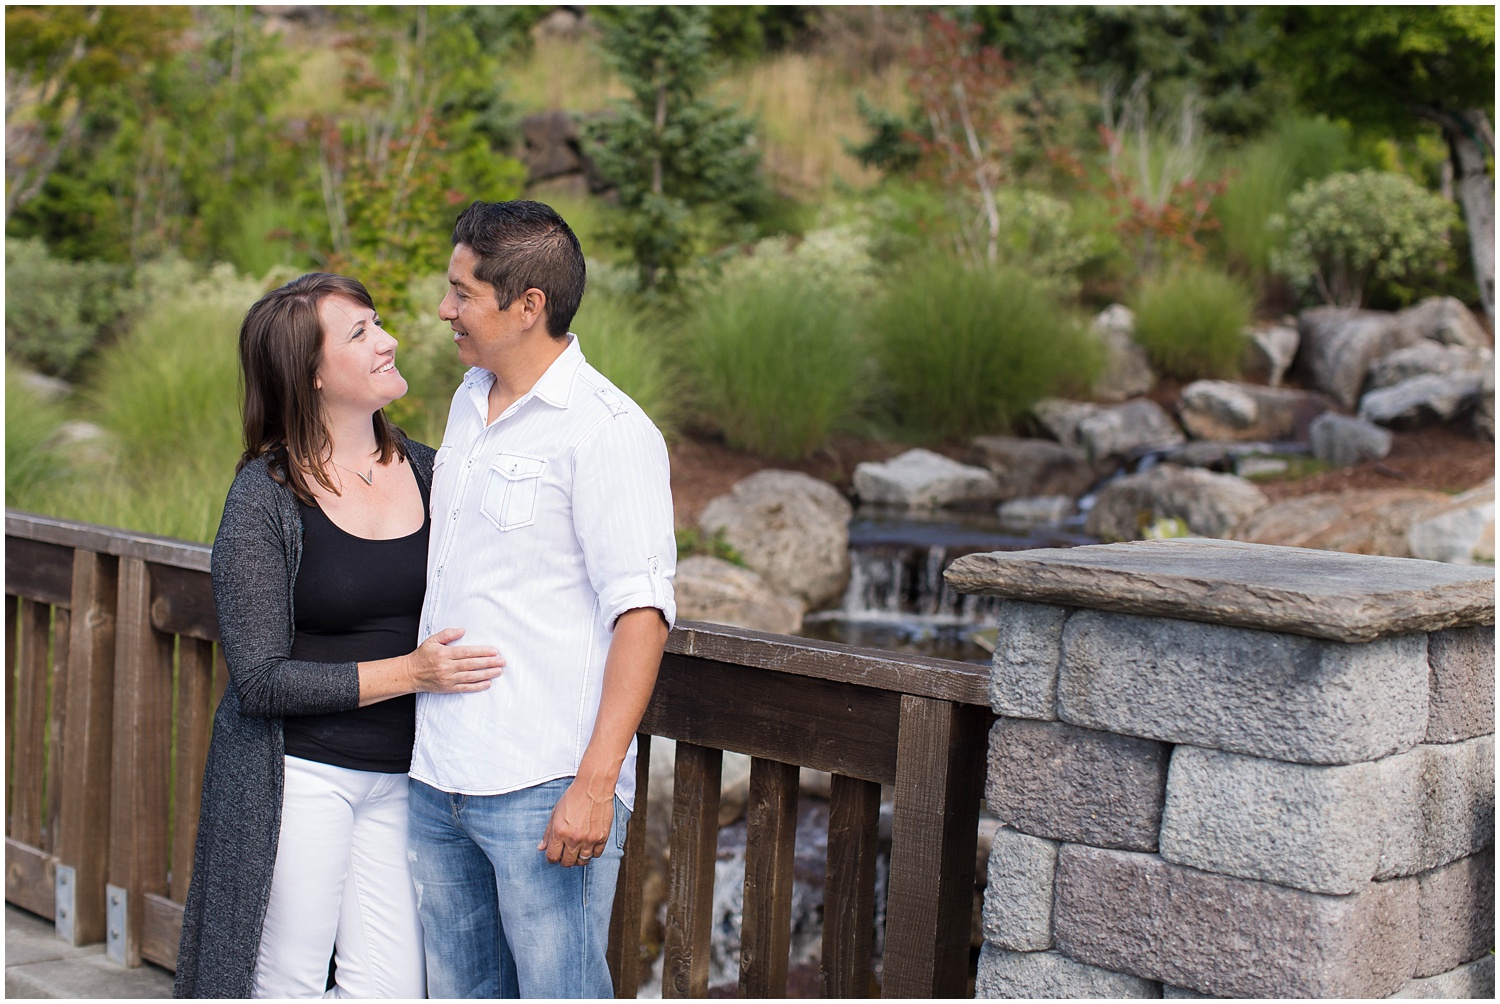 Issaquah Highlands Family Photography | Issaquah, WA | Cinnamon Wolfe Photography 